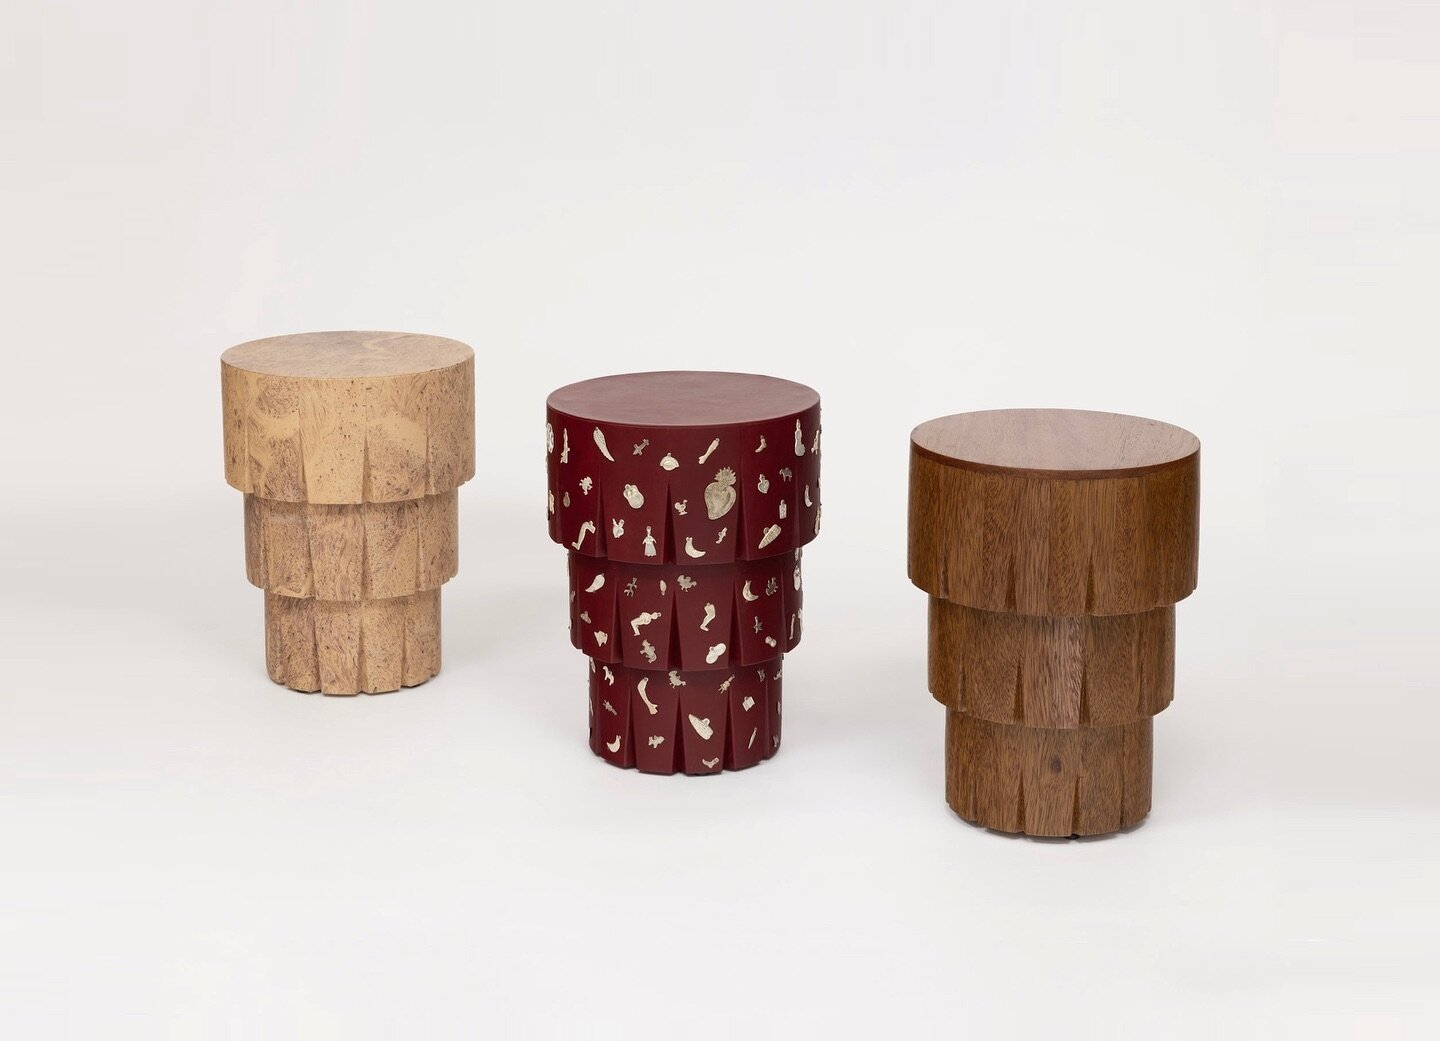 Milagritos Side Table in Hand Speckeled Parchment, Red Leather and Silver Milagritos and Tornillo Wood.

The unique texture of the Speckled parchment generates a trompe l&rsquo;oeil, where the Parchment can be perceived as stone, wood or cork, part o